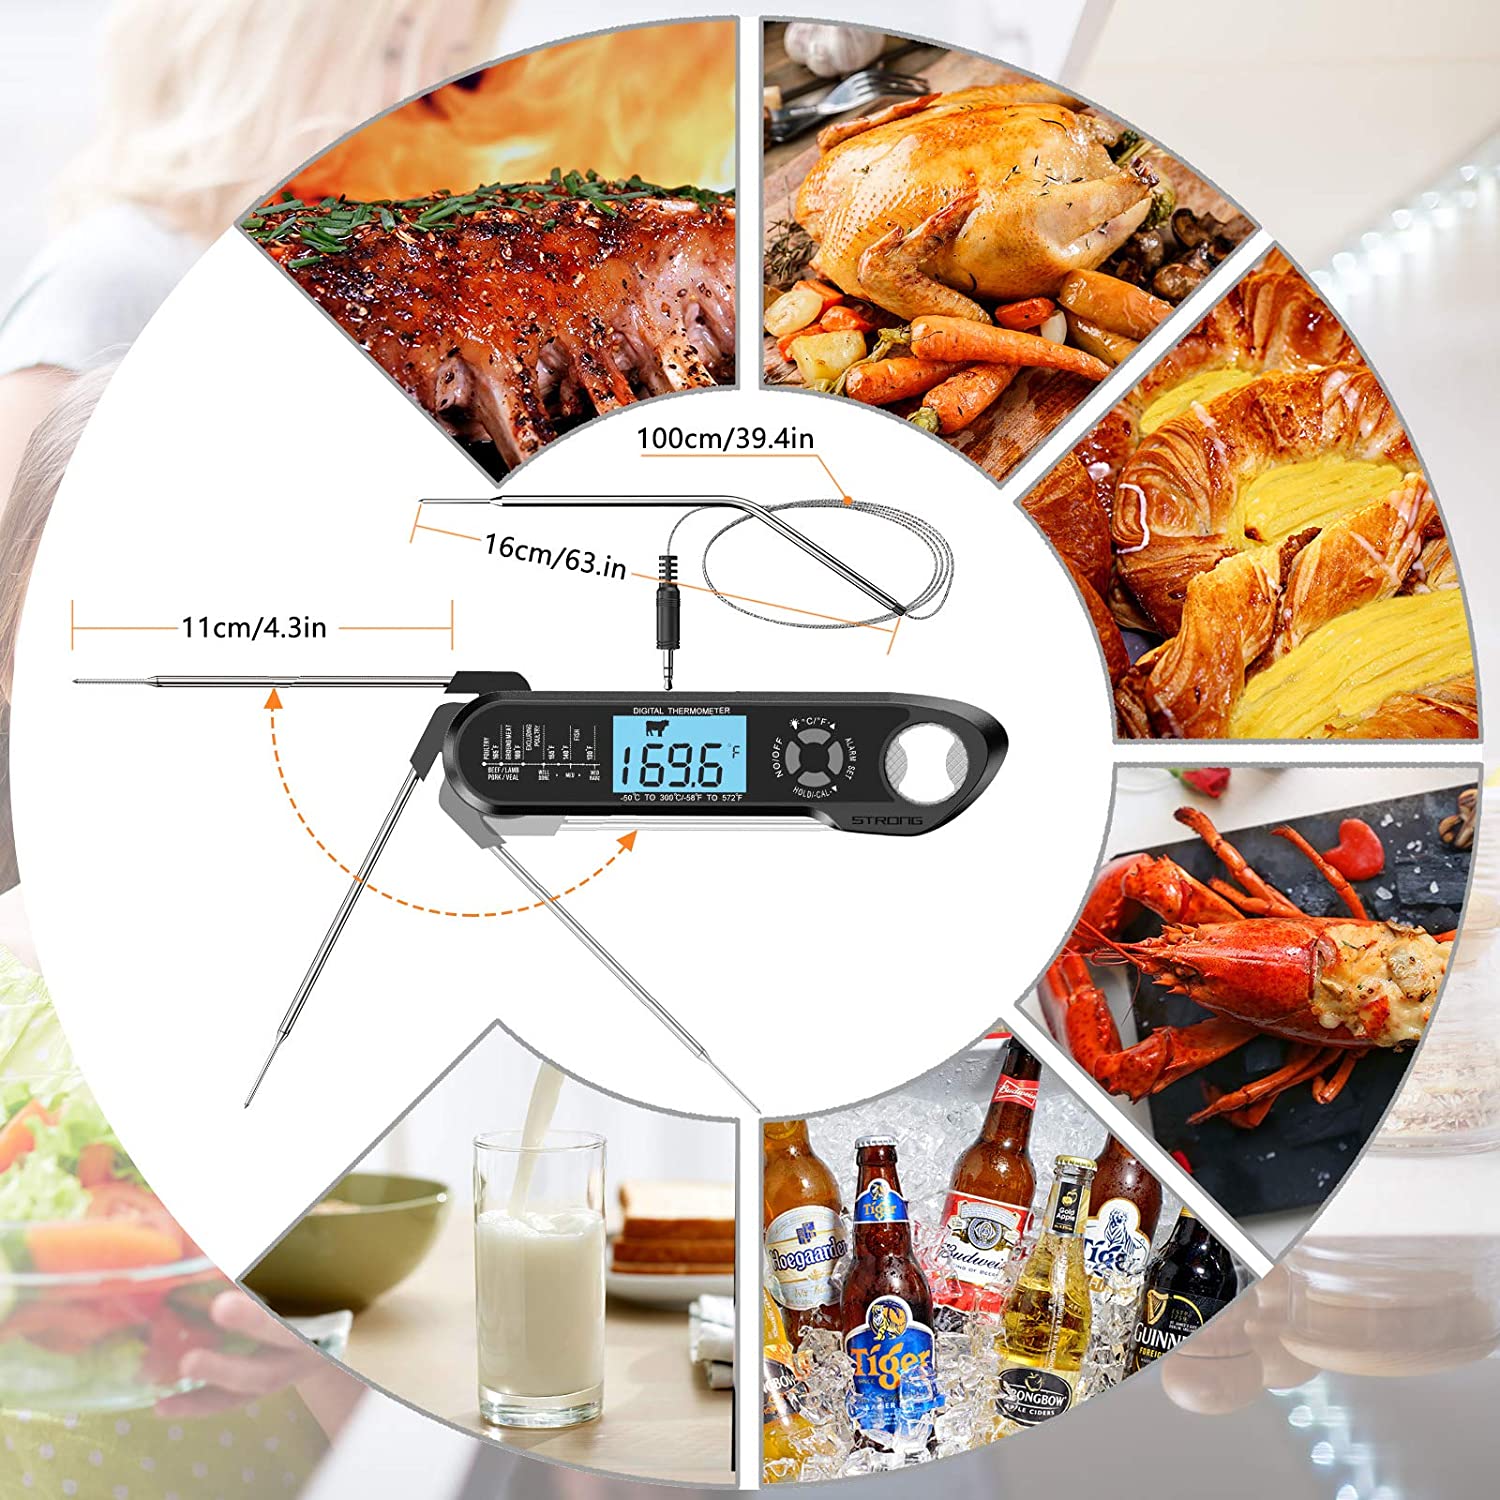 Meat Thermometer, 2 in 1 Meat Thermometer Instant Read, Digital Food Thermometer with Alarm Function Backlight for Cooking, Grilling, Smoking, Frying, Baking, Kitchen, Oven, Turkey, Steak (Red) - 副本